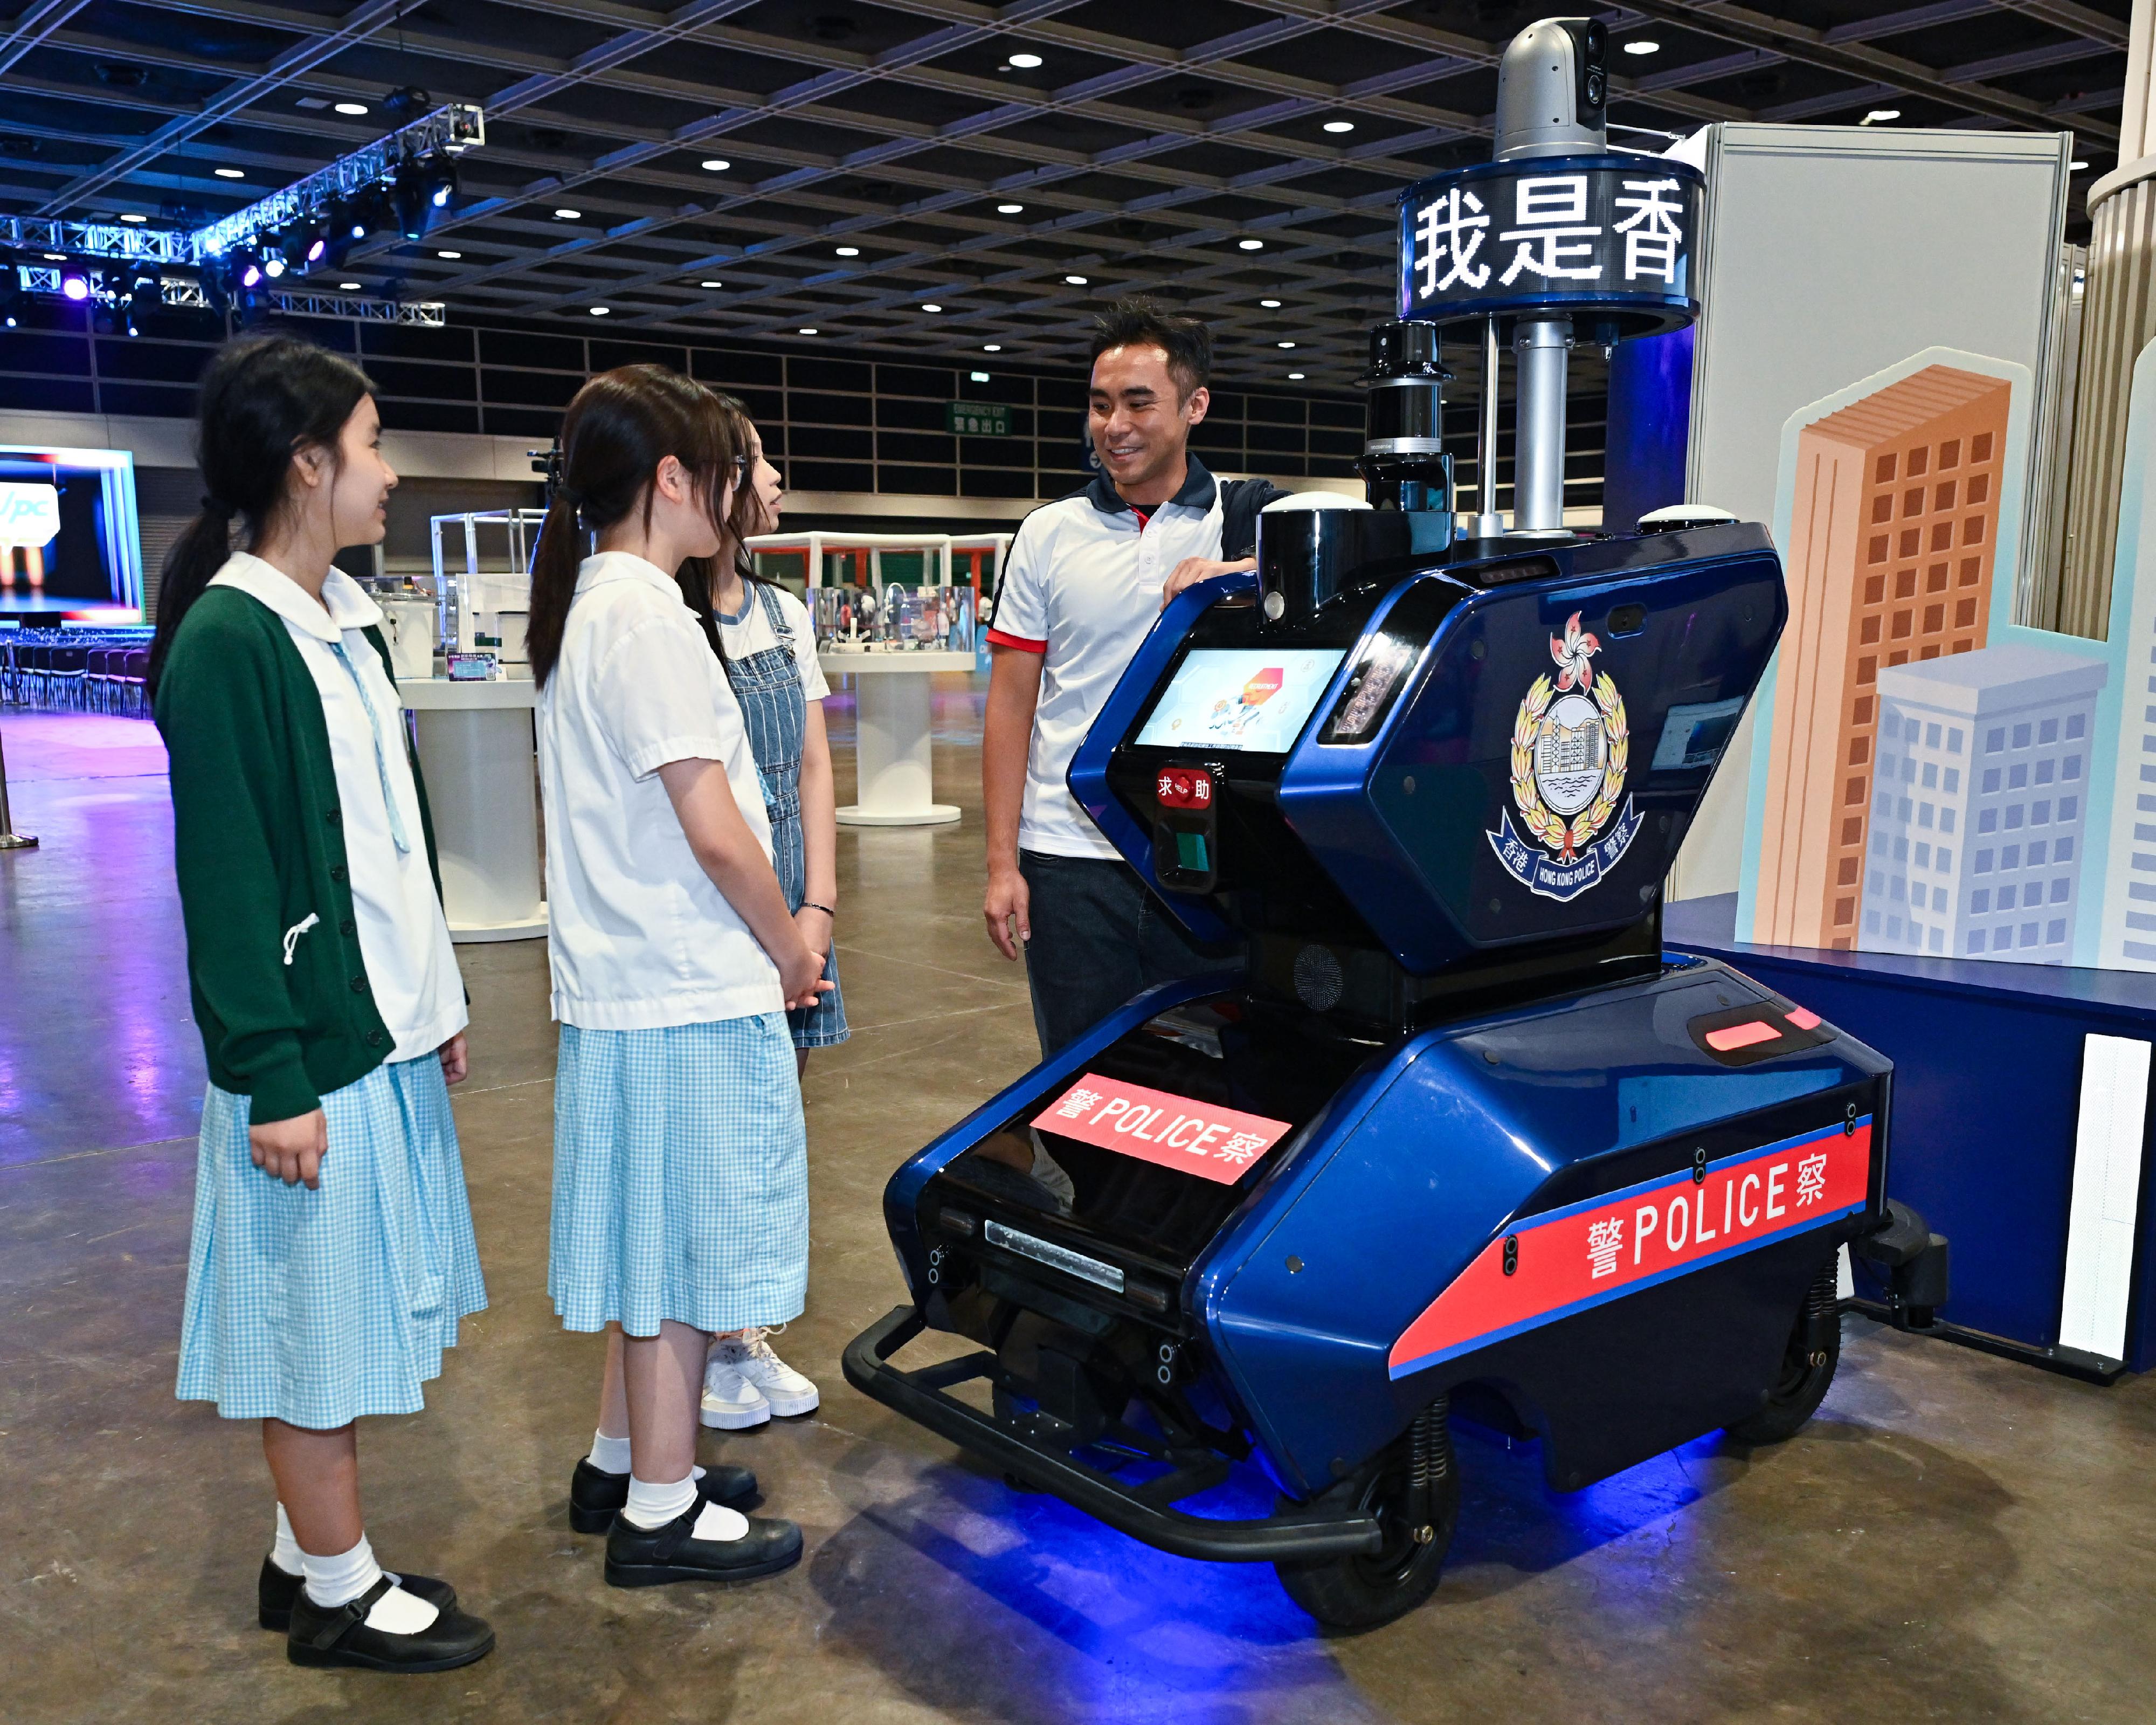 The JPC Innovation and Technology Competition 2023-24, organised by the Junior Police Call, held its award presentation ceremony cum carnival at the Hong Kong Convention and Exhibition Centre today (May 11). The carnival features a digital policing display zone where patrol robot is exhibited to showcase how the Force leverages technology to enhance operational efficiency.